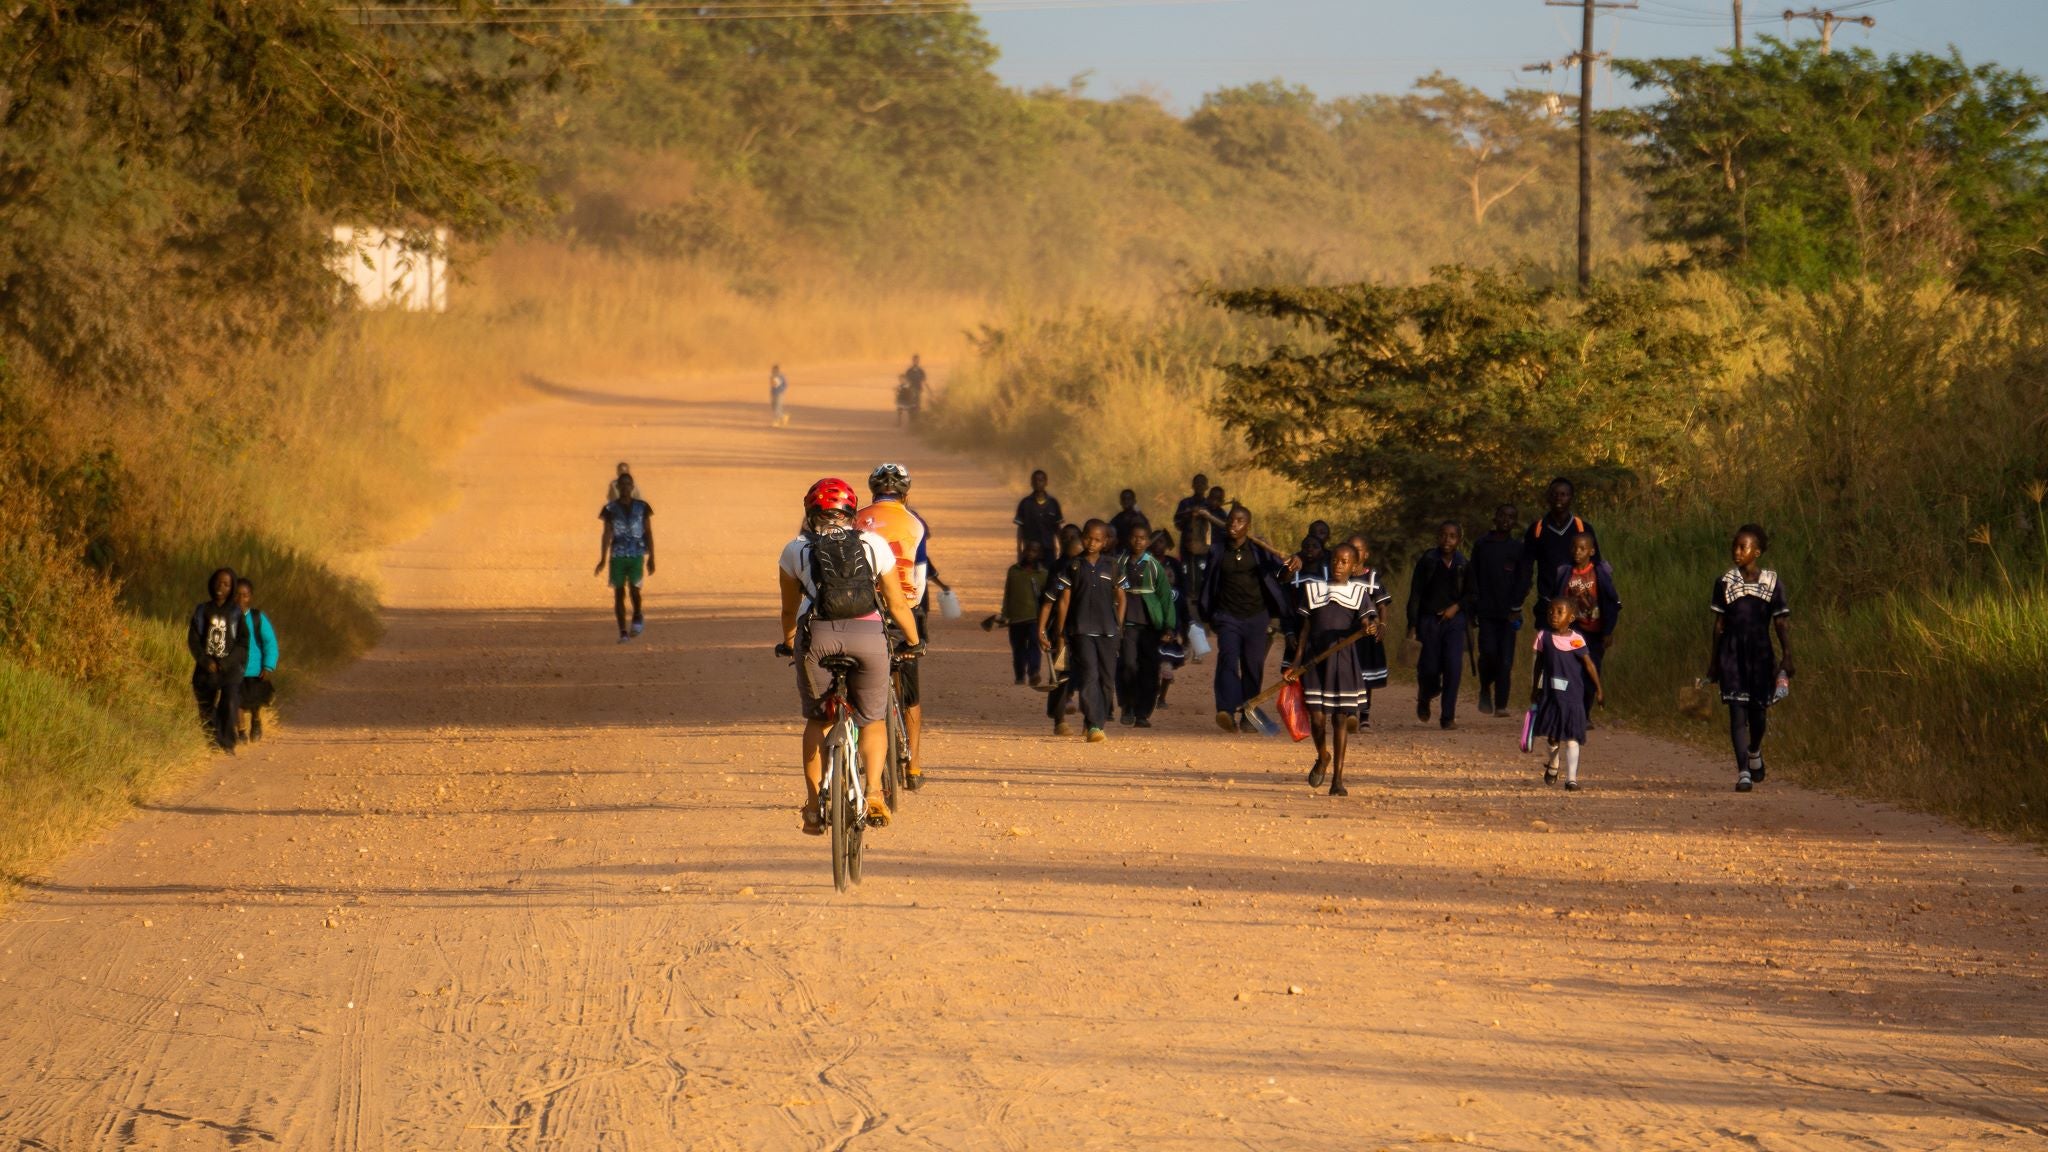 Samuel Roy on a bicycle on a dirt road with many African students